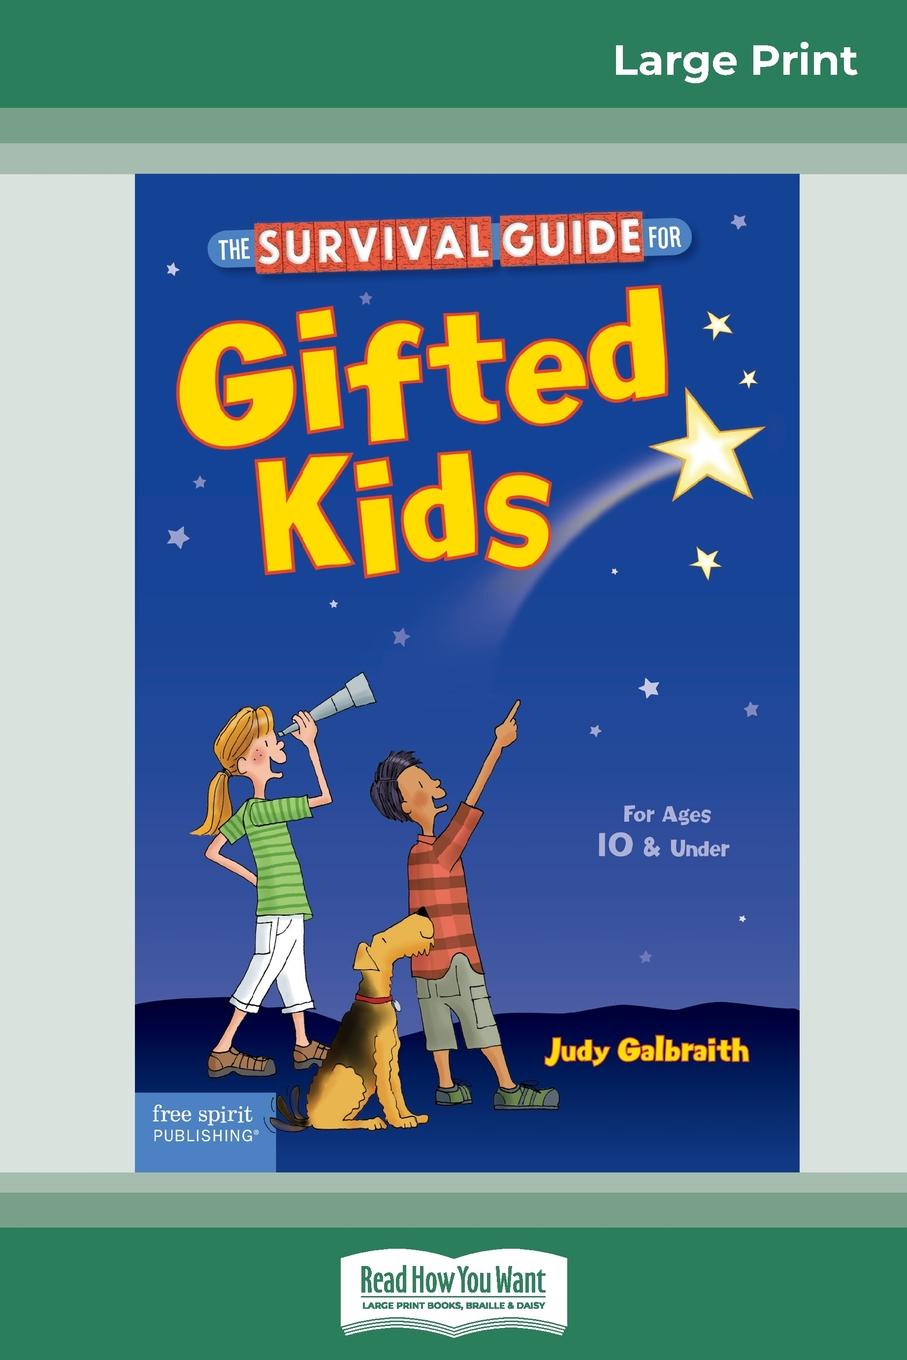 The Survival Guide for Gifted Kids. For Ages 10 & Under (Revised & Updated 3rd Edition) (16pt Large Print Edition)